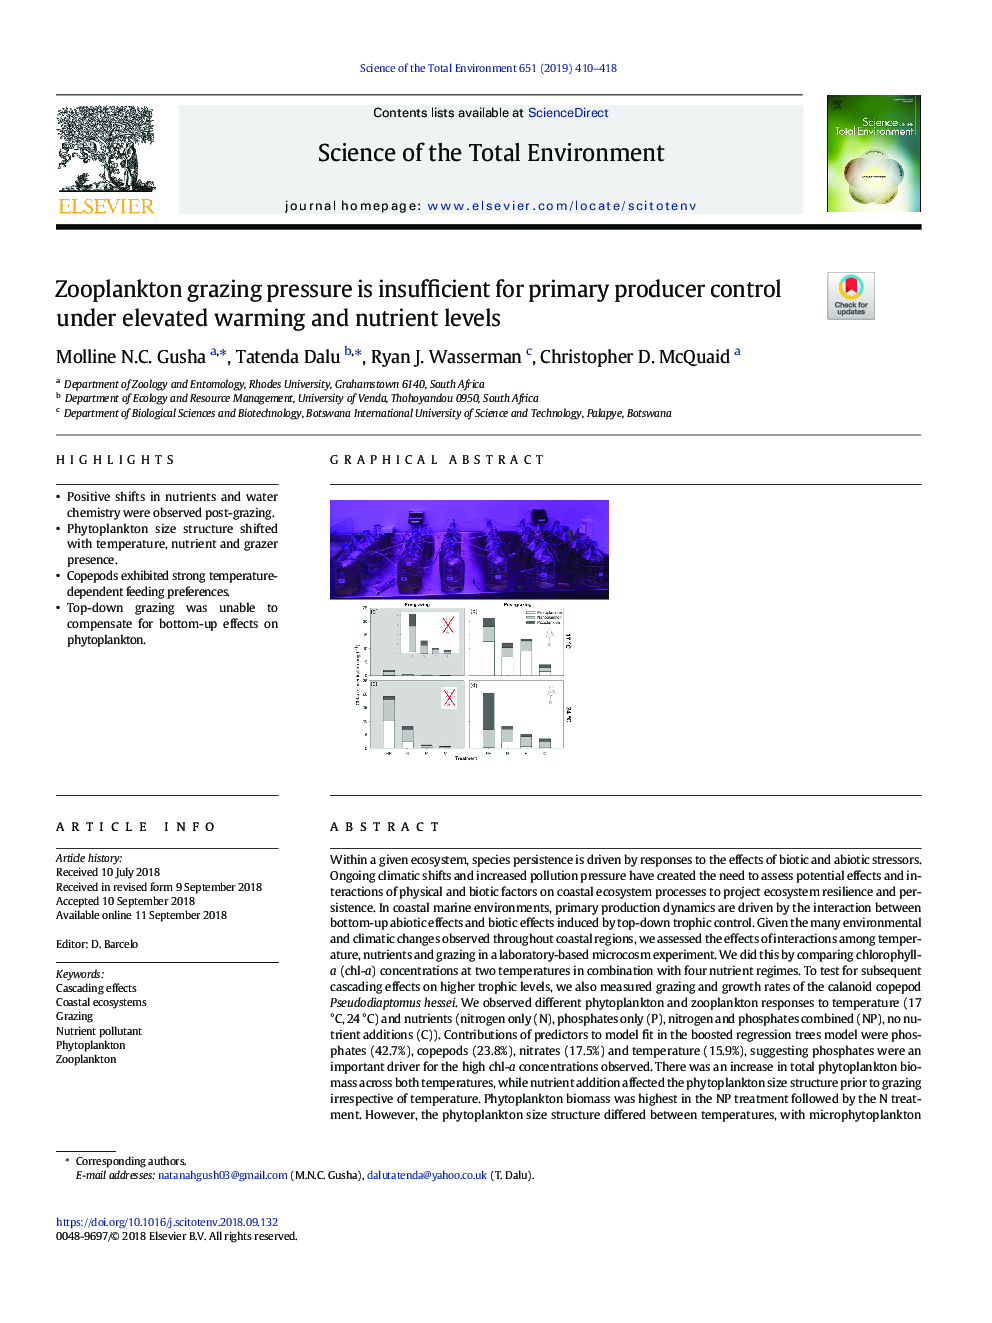 Zooplankton grazing pressure is insufficient for primary producer control under elevated warming and nutrient levels